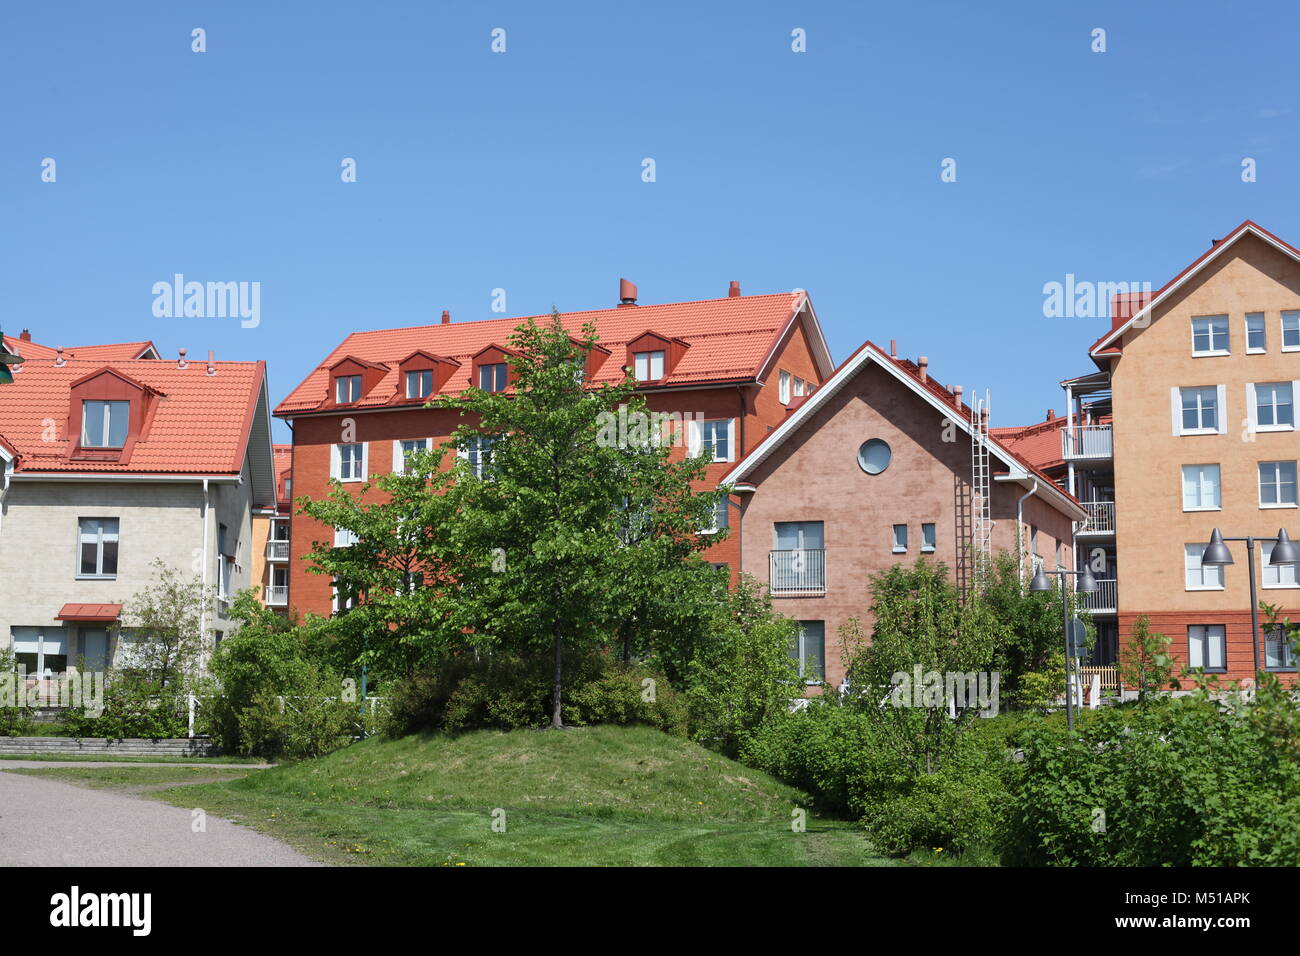 several low-rise houses Stock Photo